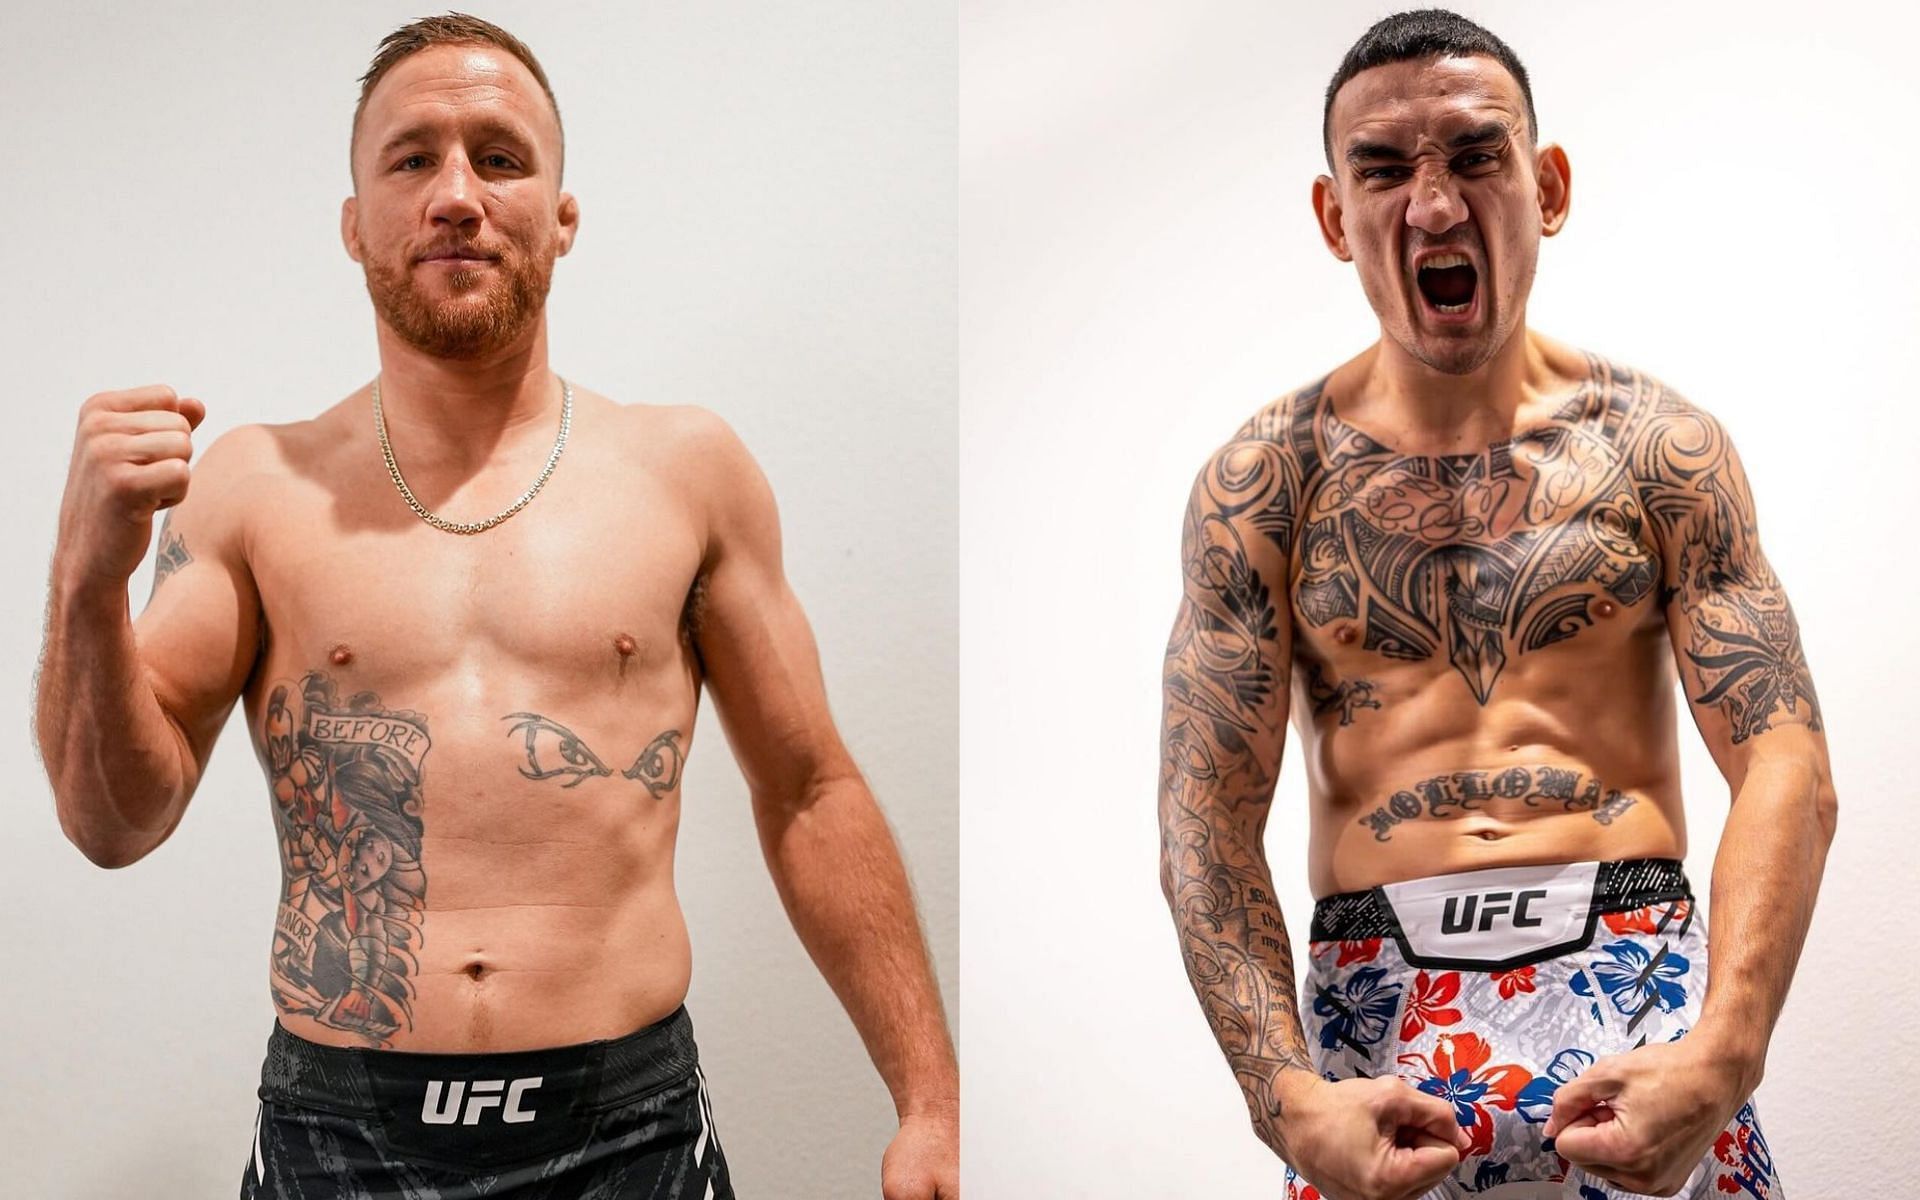 Justin Gaethje (left) takes on Max Holloway (right) with the BMF title on the line [Image courtesy @ufc on Instagram]